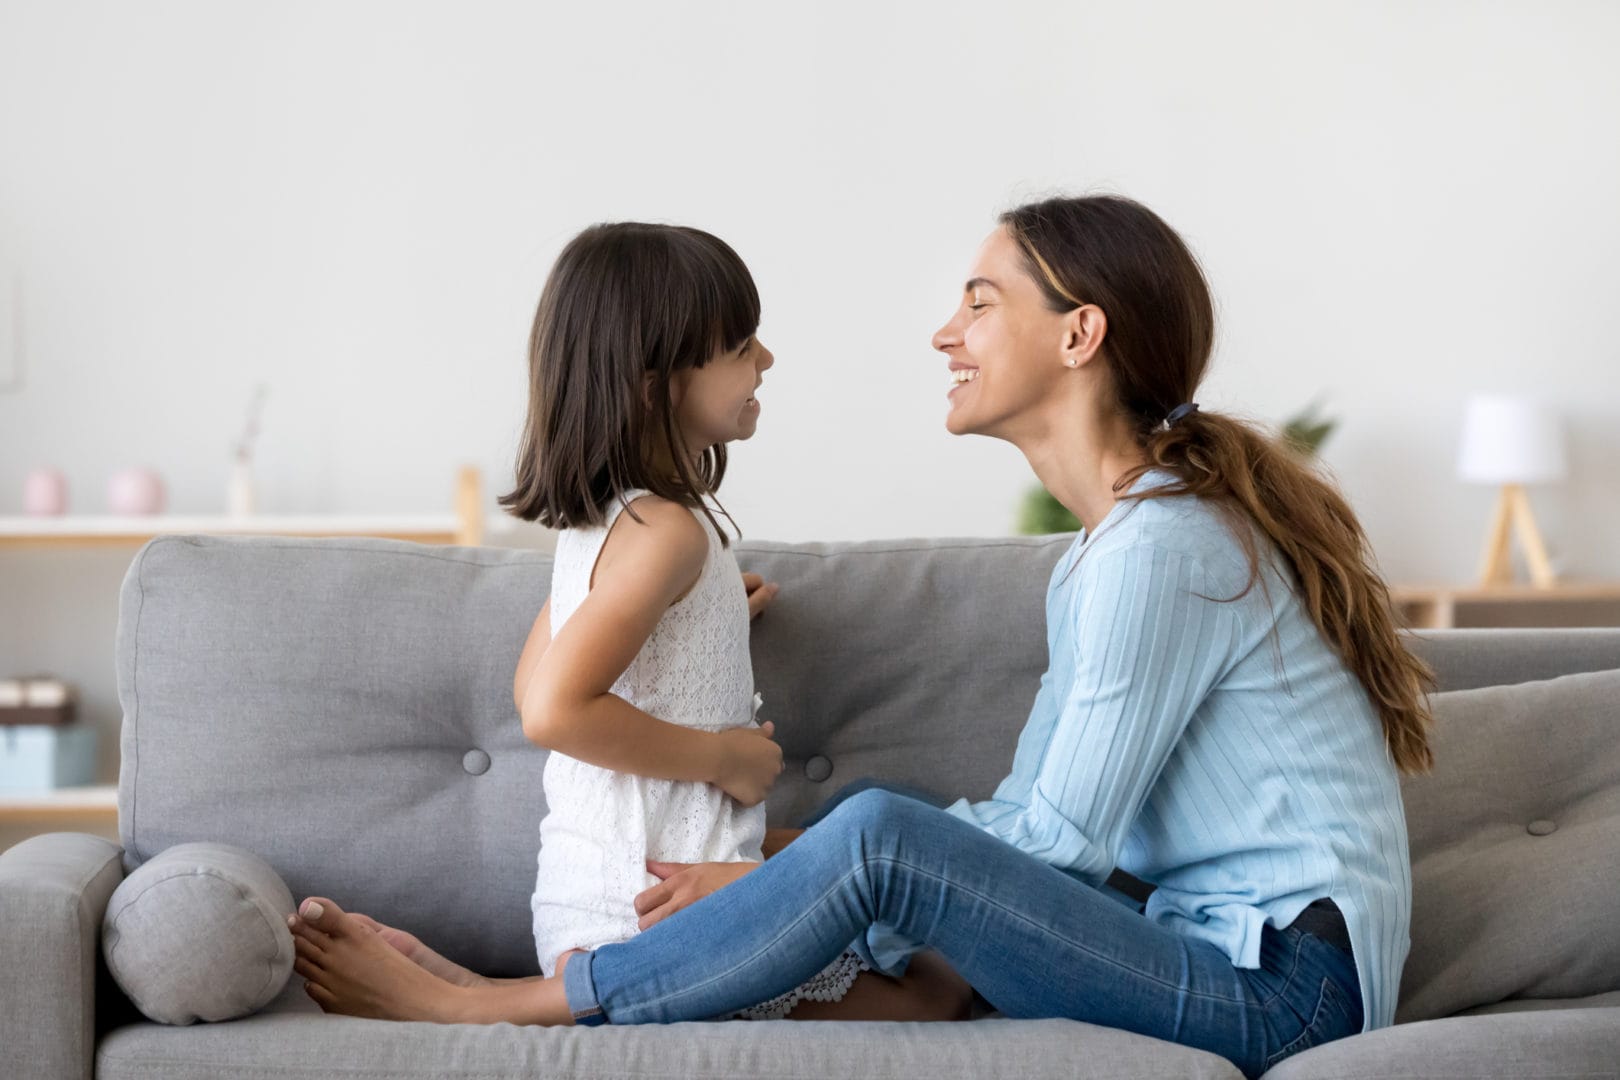 Babysitting tips: How to start conversations with kids